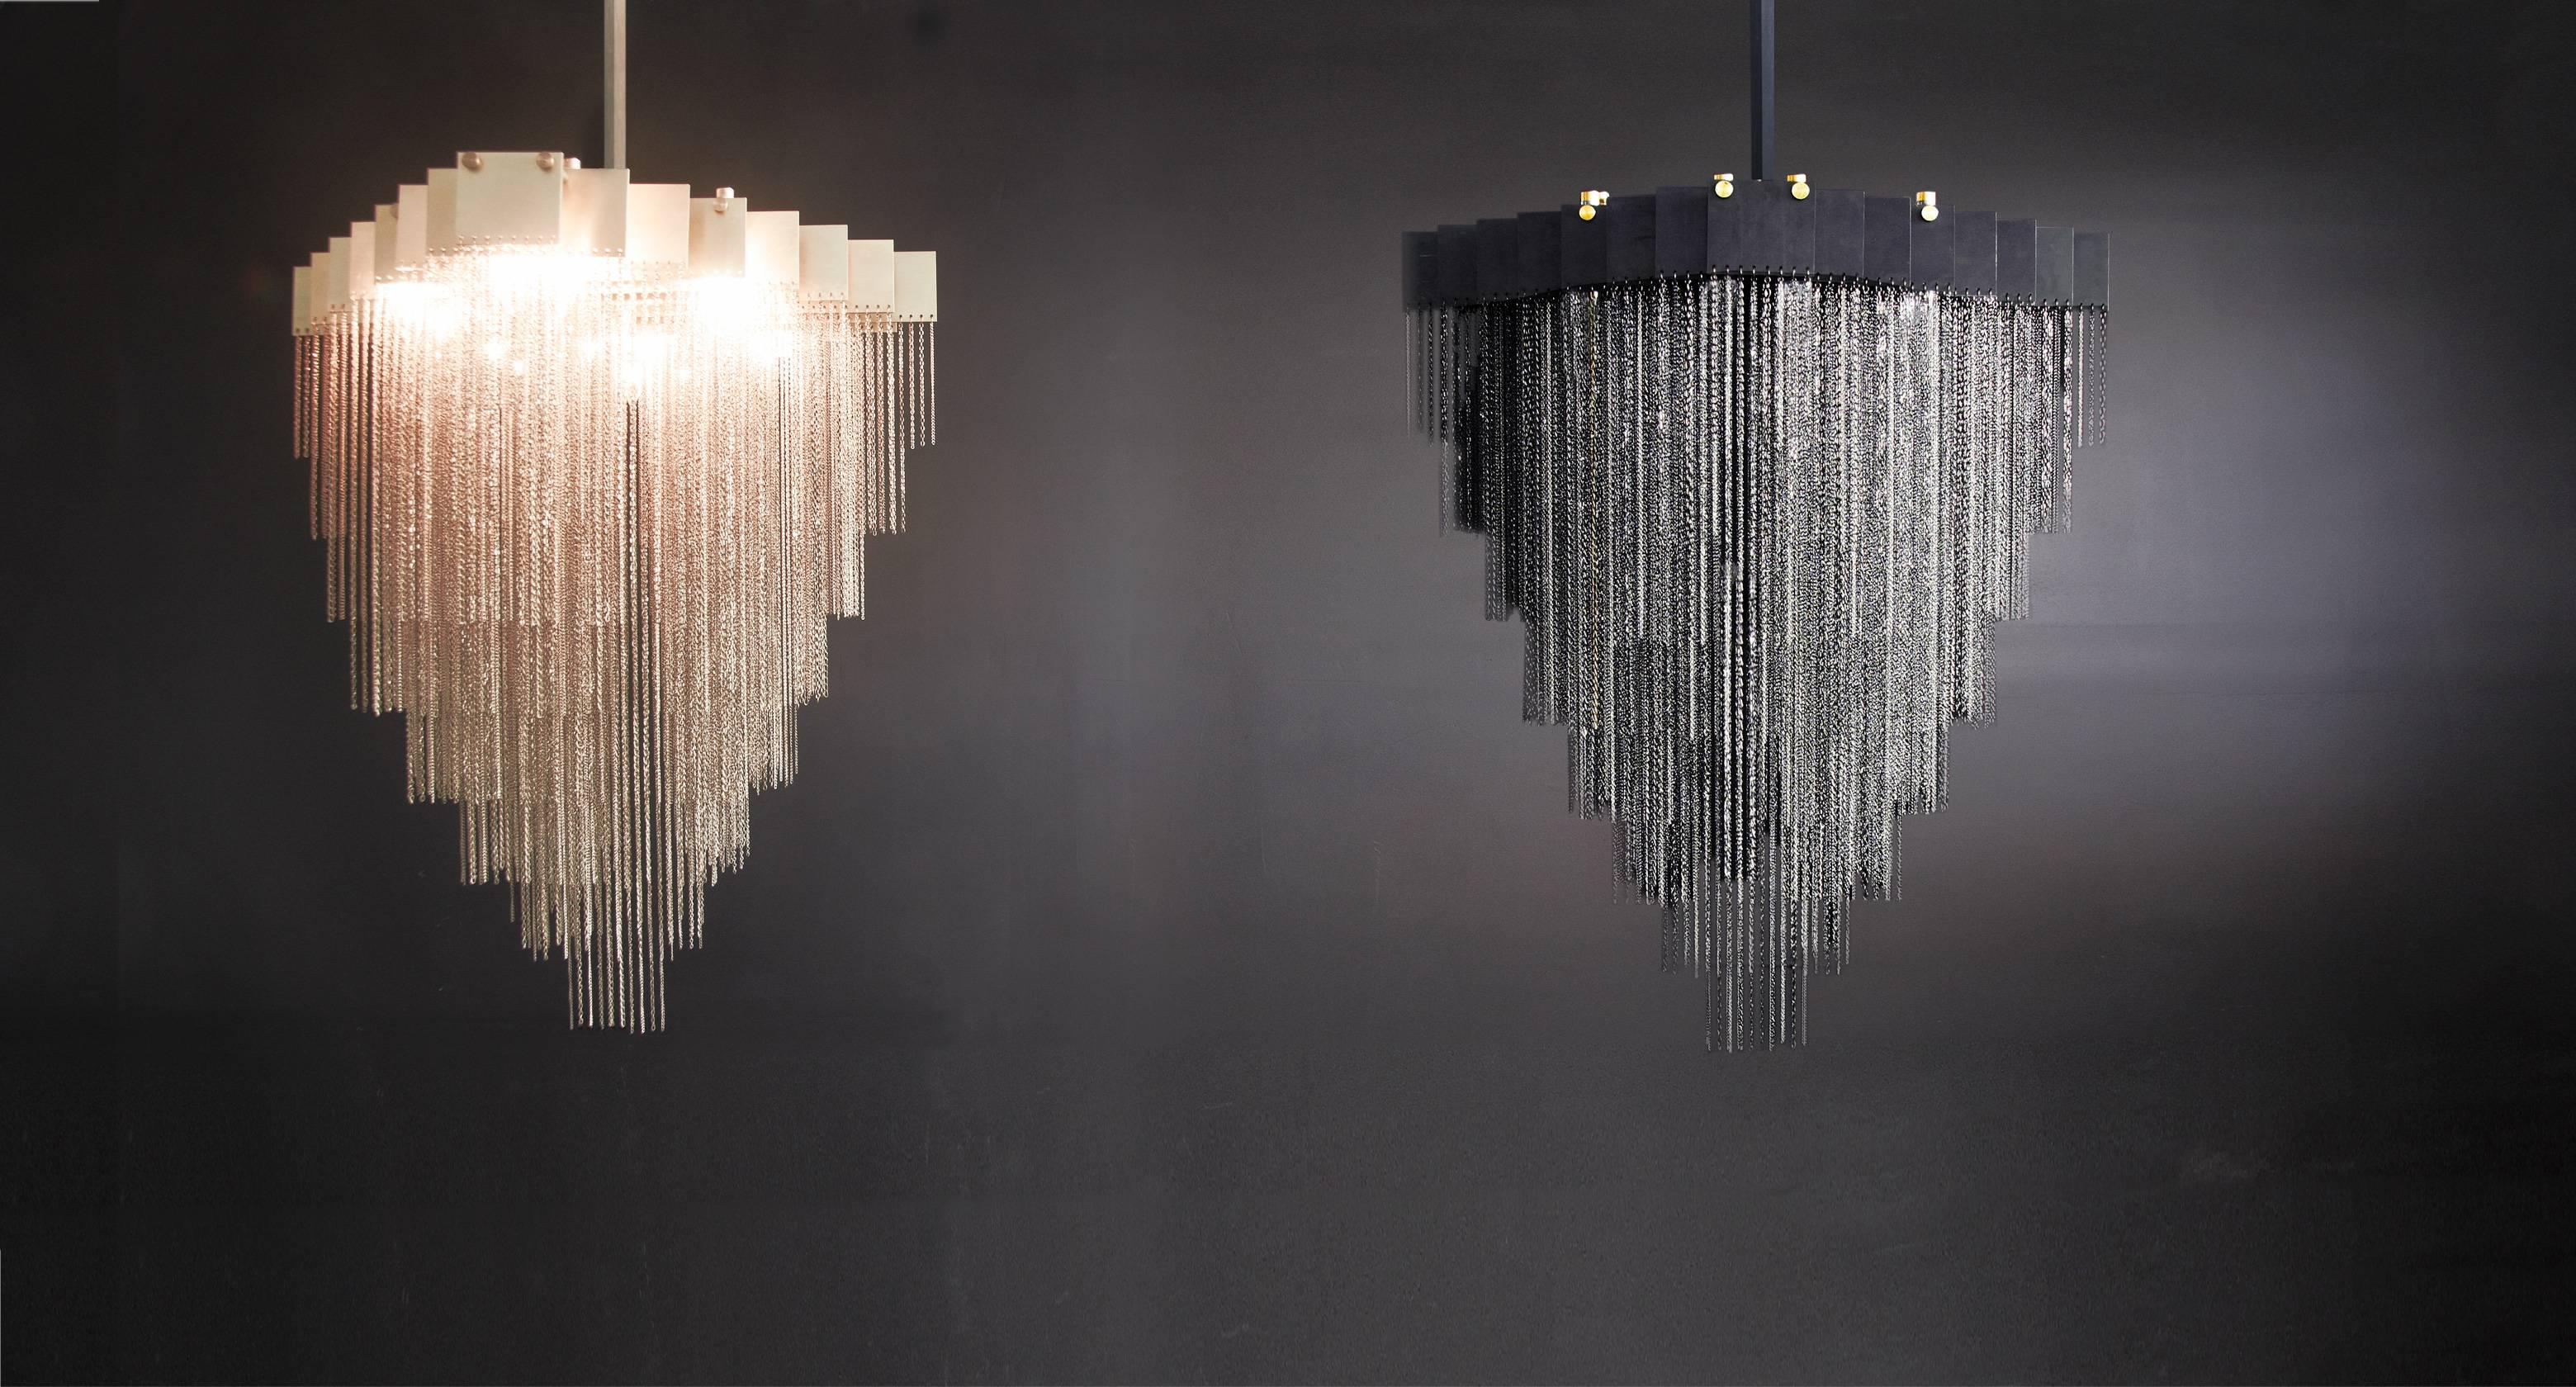 A bold and elegant sculptural light fixture, the Kelly chandelier holds over a half-kilometer of reflective chain to generate a staggered and diametrically exquisite geometrical form. 

Light glimmers throughout the chain for to create a soft